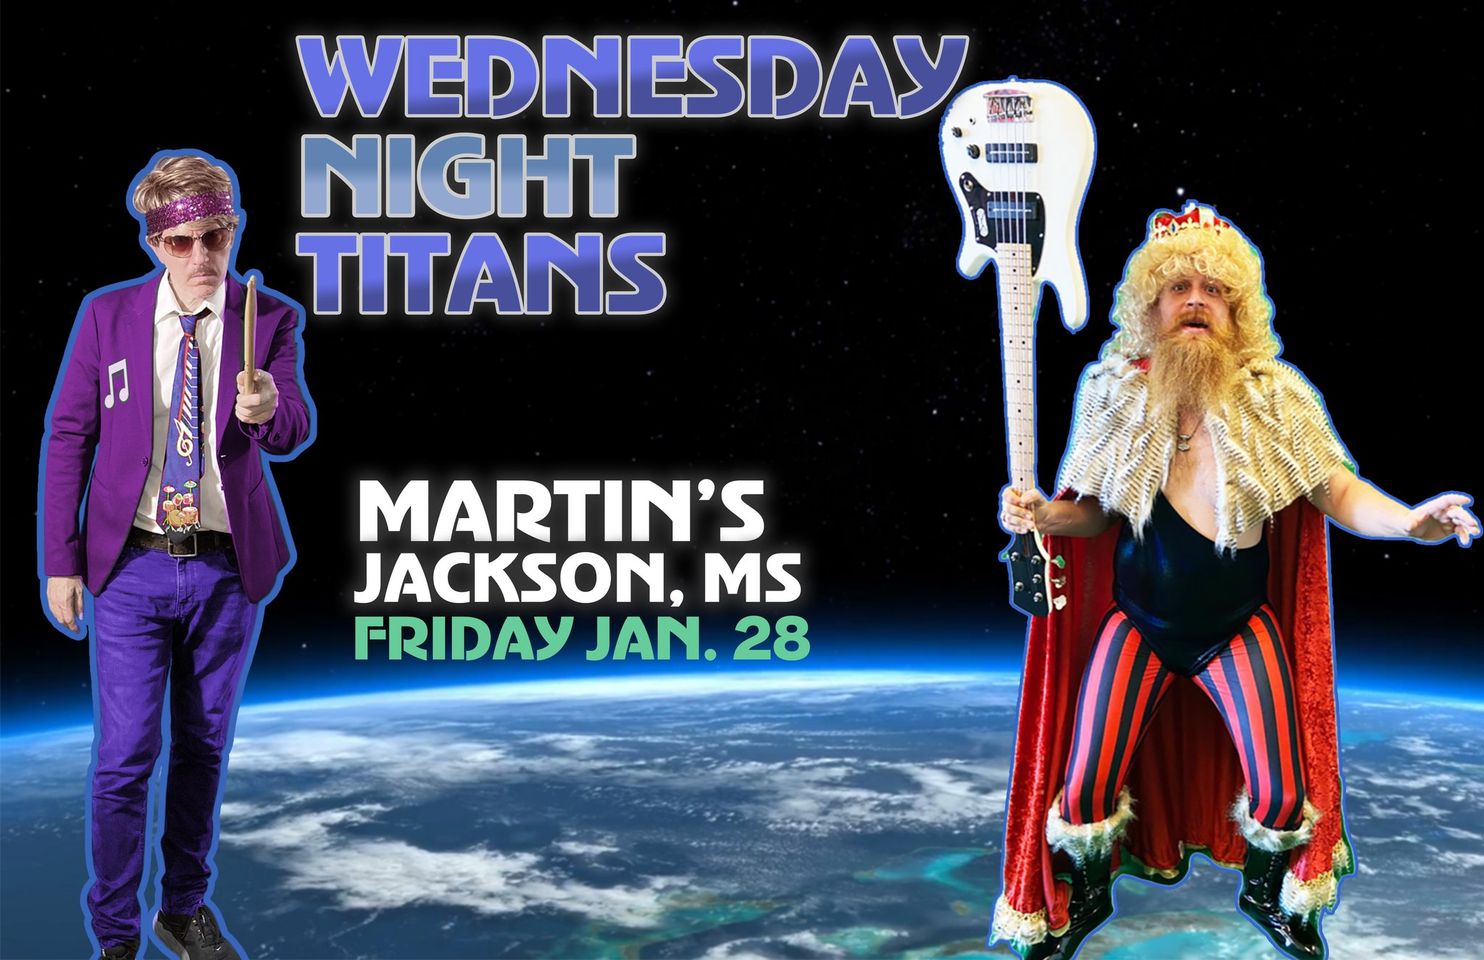 Wednesday Night Titans at Martin’s Downtown